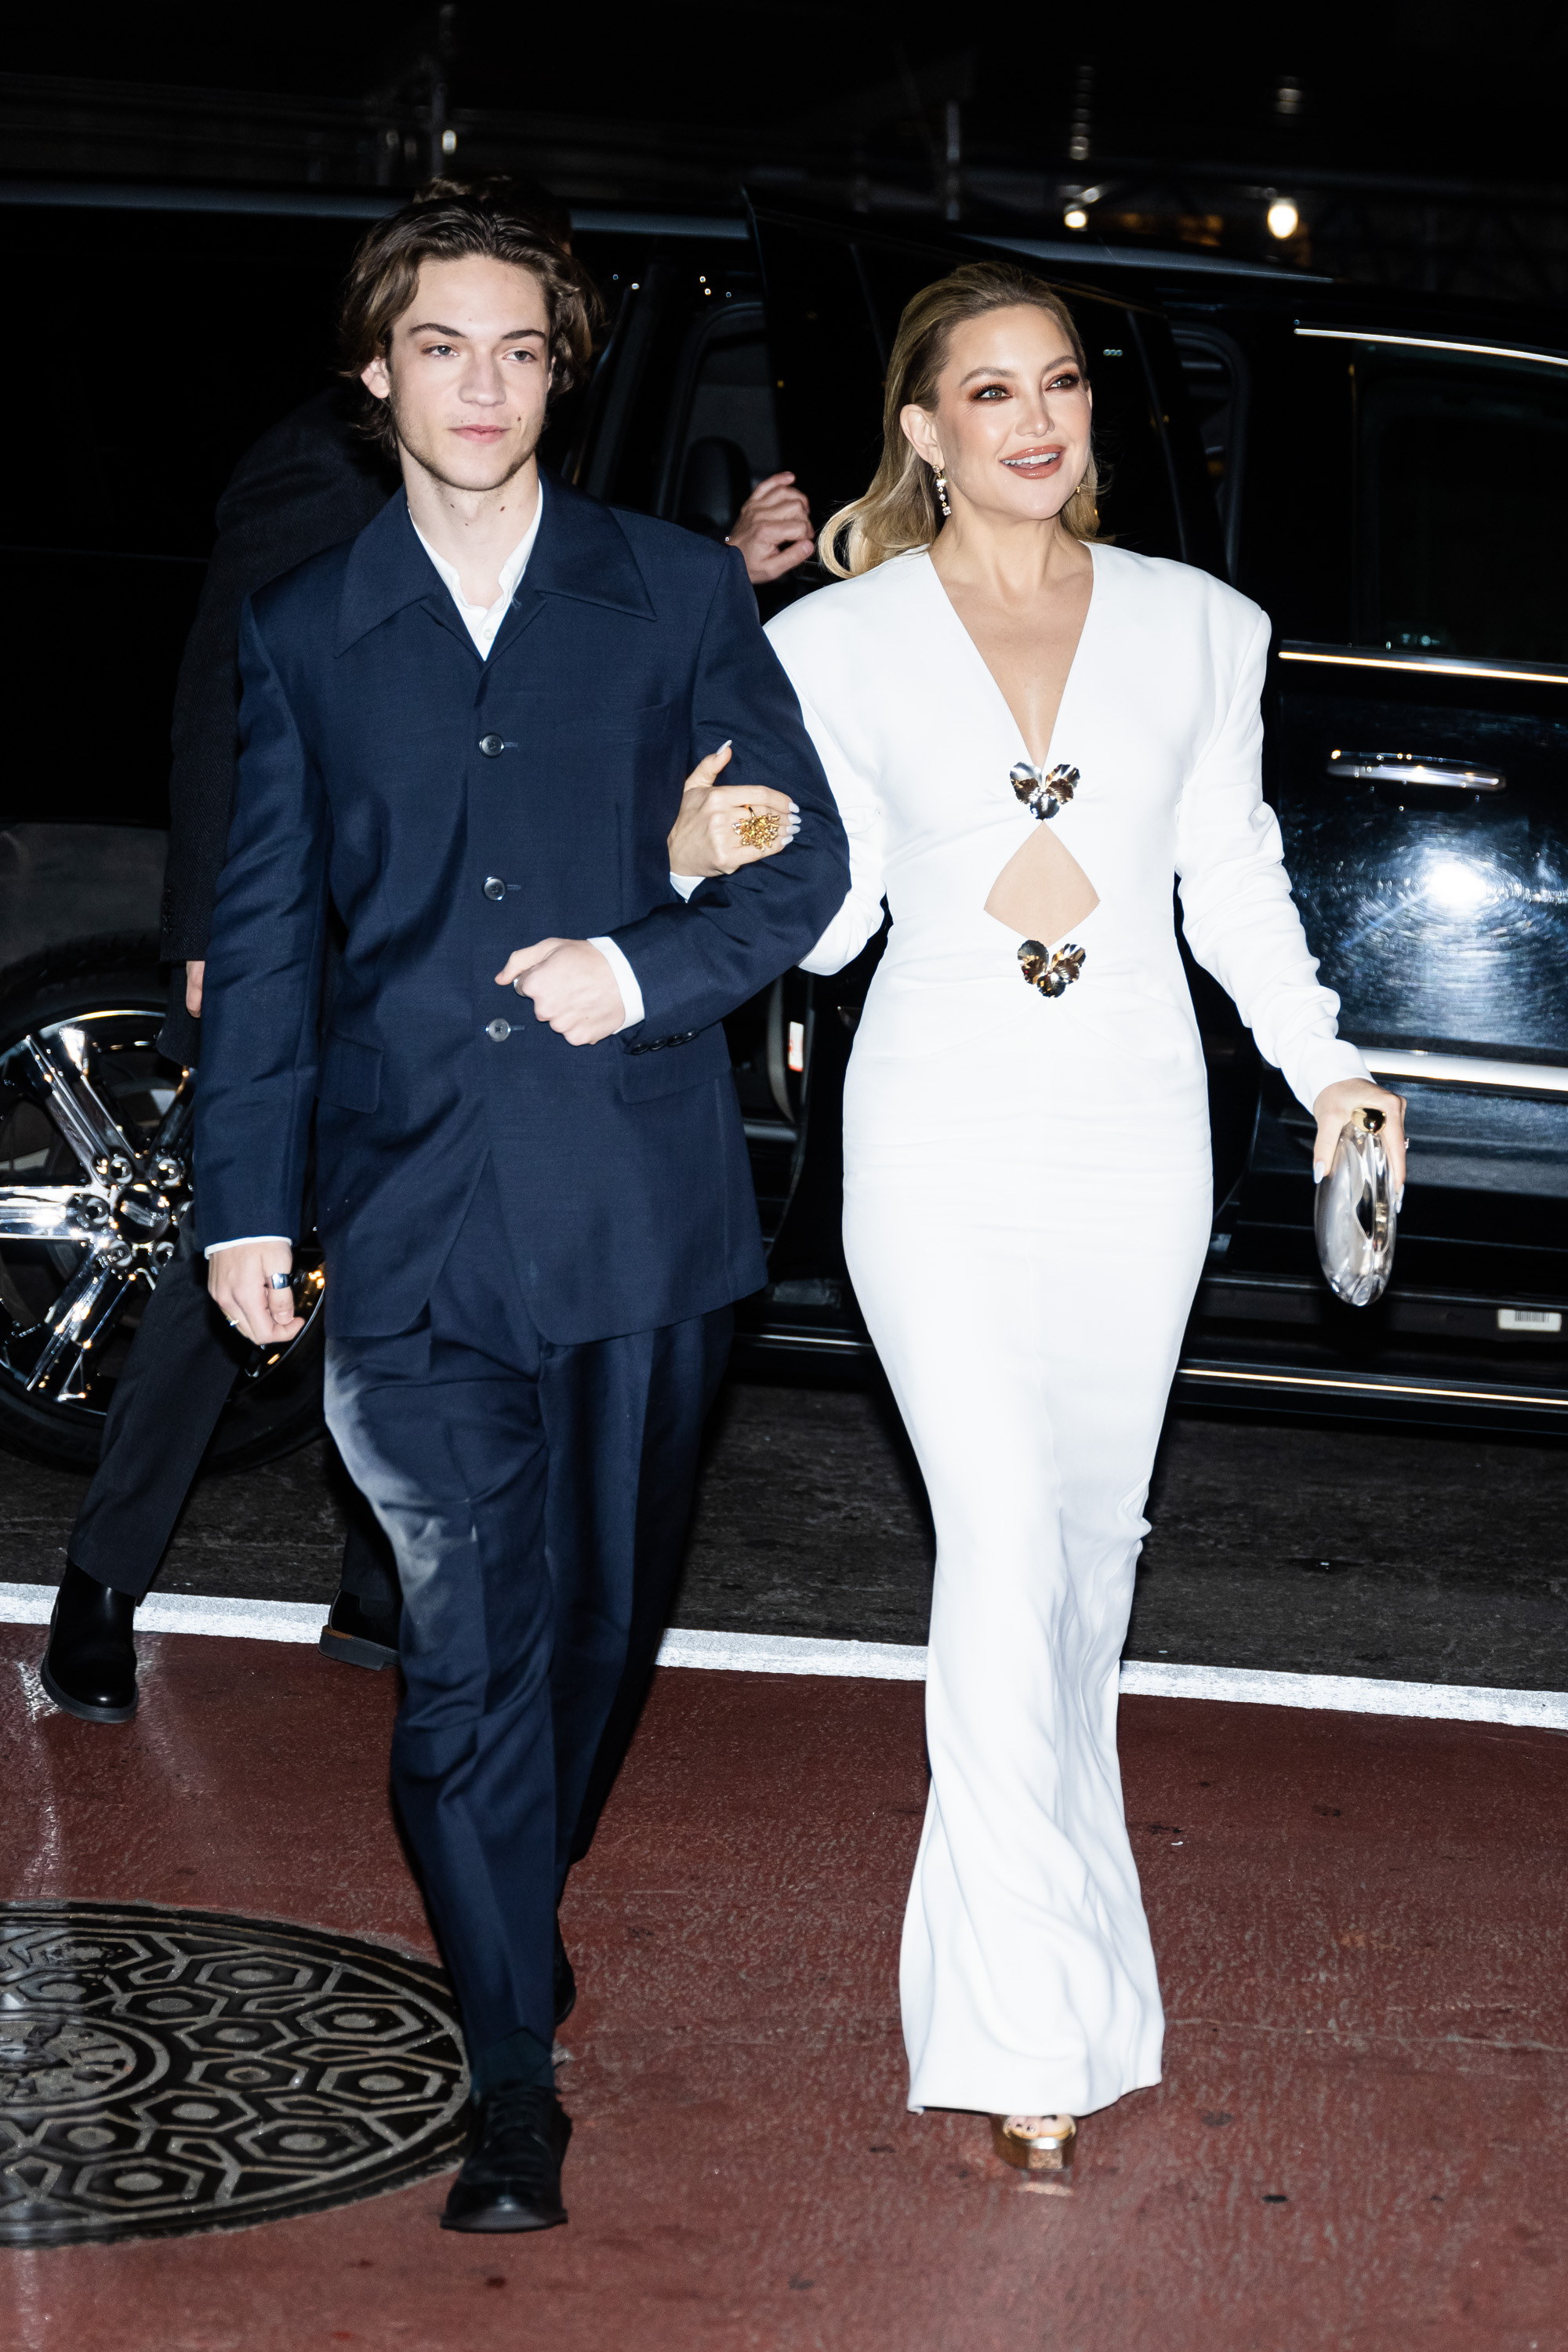 Kate pictured with her son Ryder Robinson at an event in December 2022